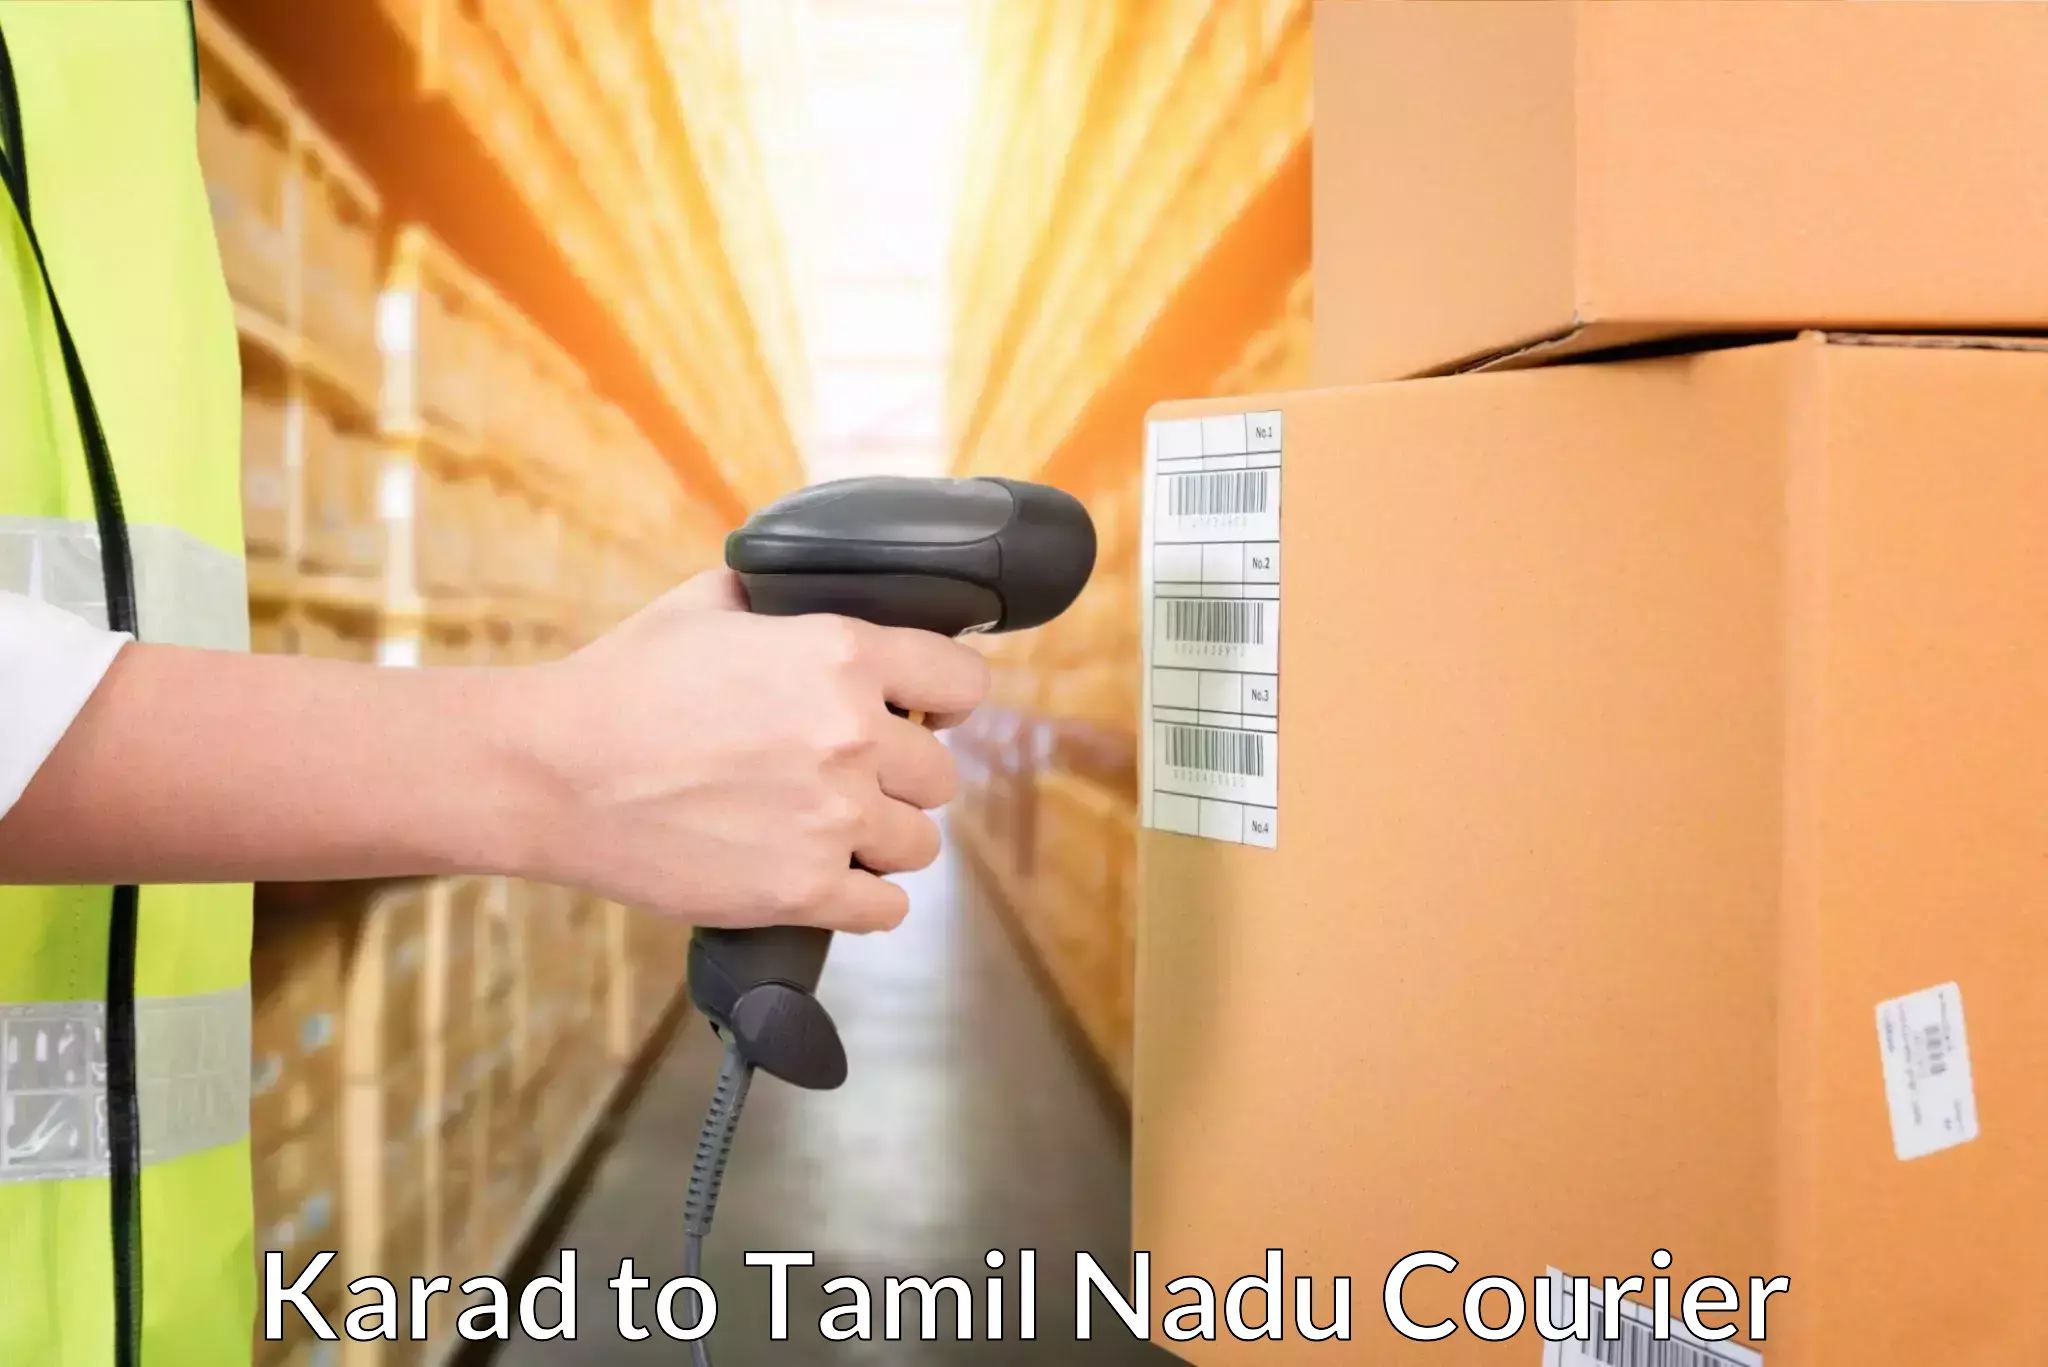 24/7 courier service in Karad to Mettupalayam